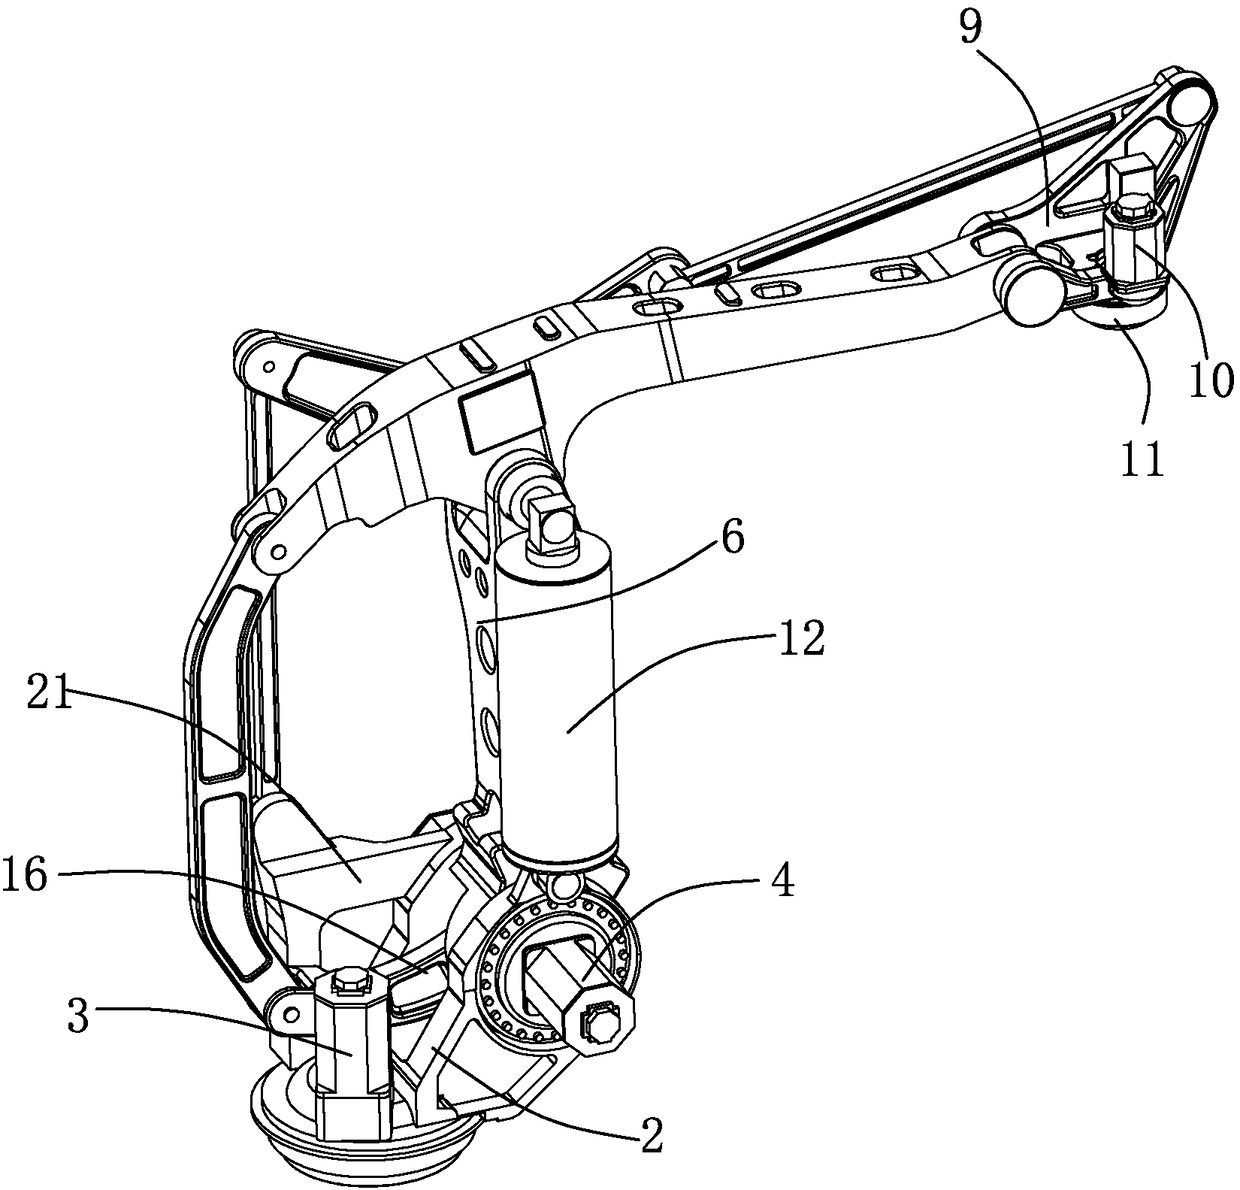 Mechanical arm mechanism with explosion protection